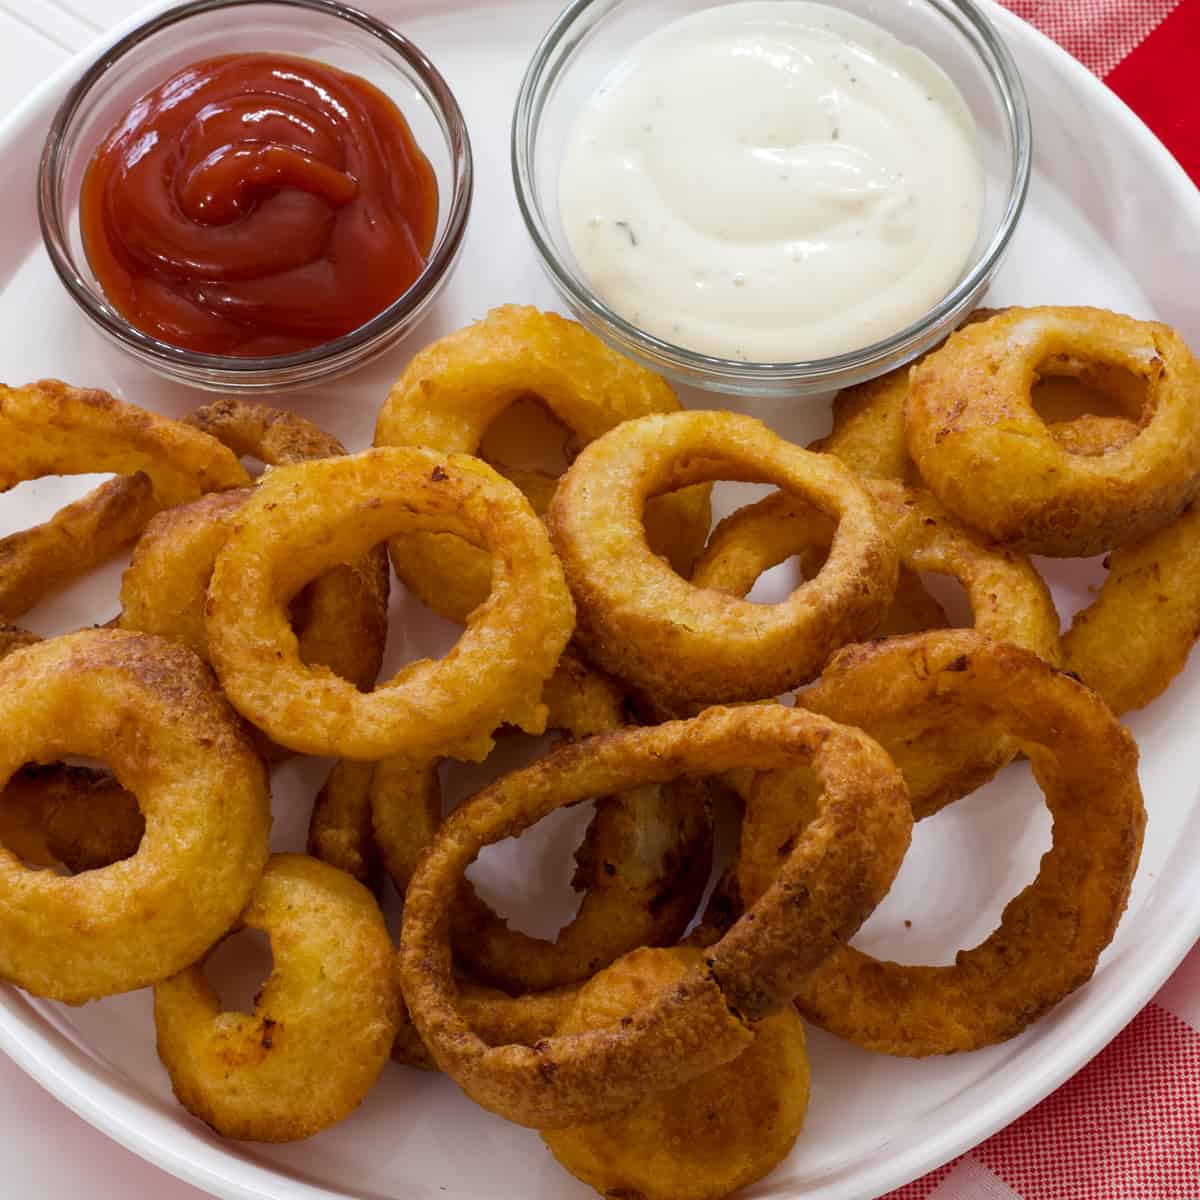 https://www.mindyscookingobsession.com/wp-content/uploads/2023/02/Frozen-Onion-Rings-in-the-Air-Fryer-1200.jpg